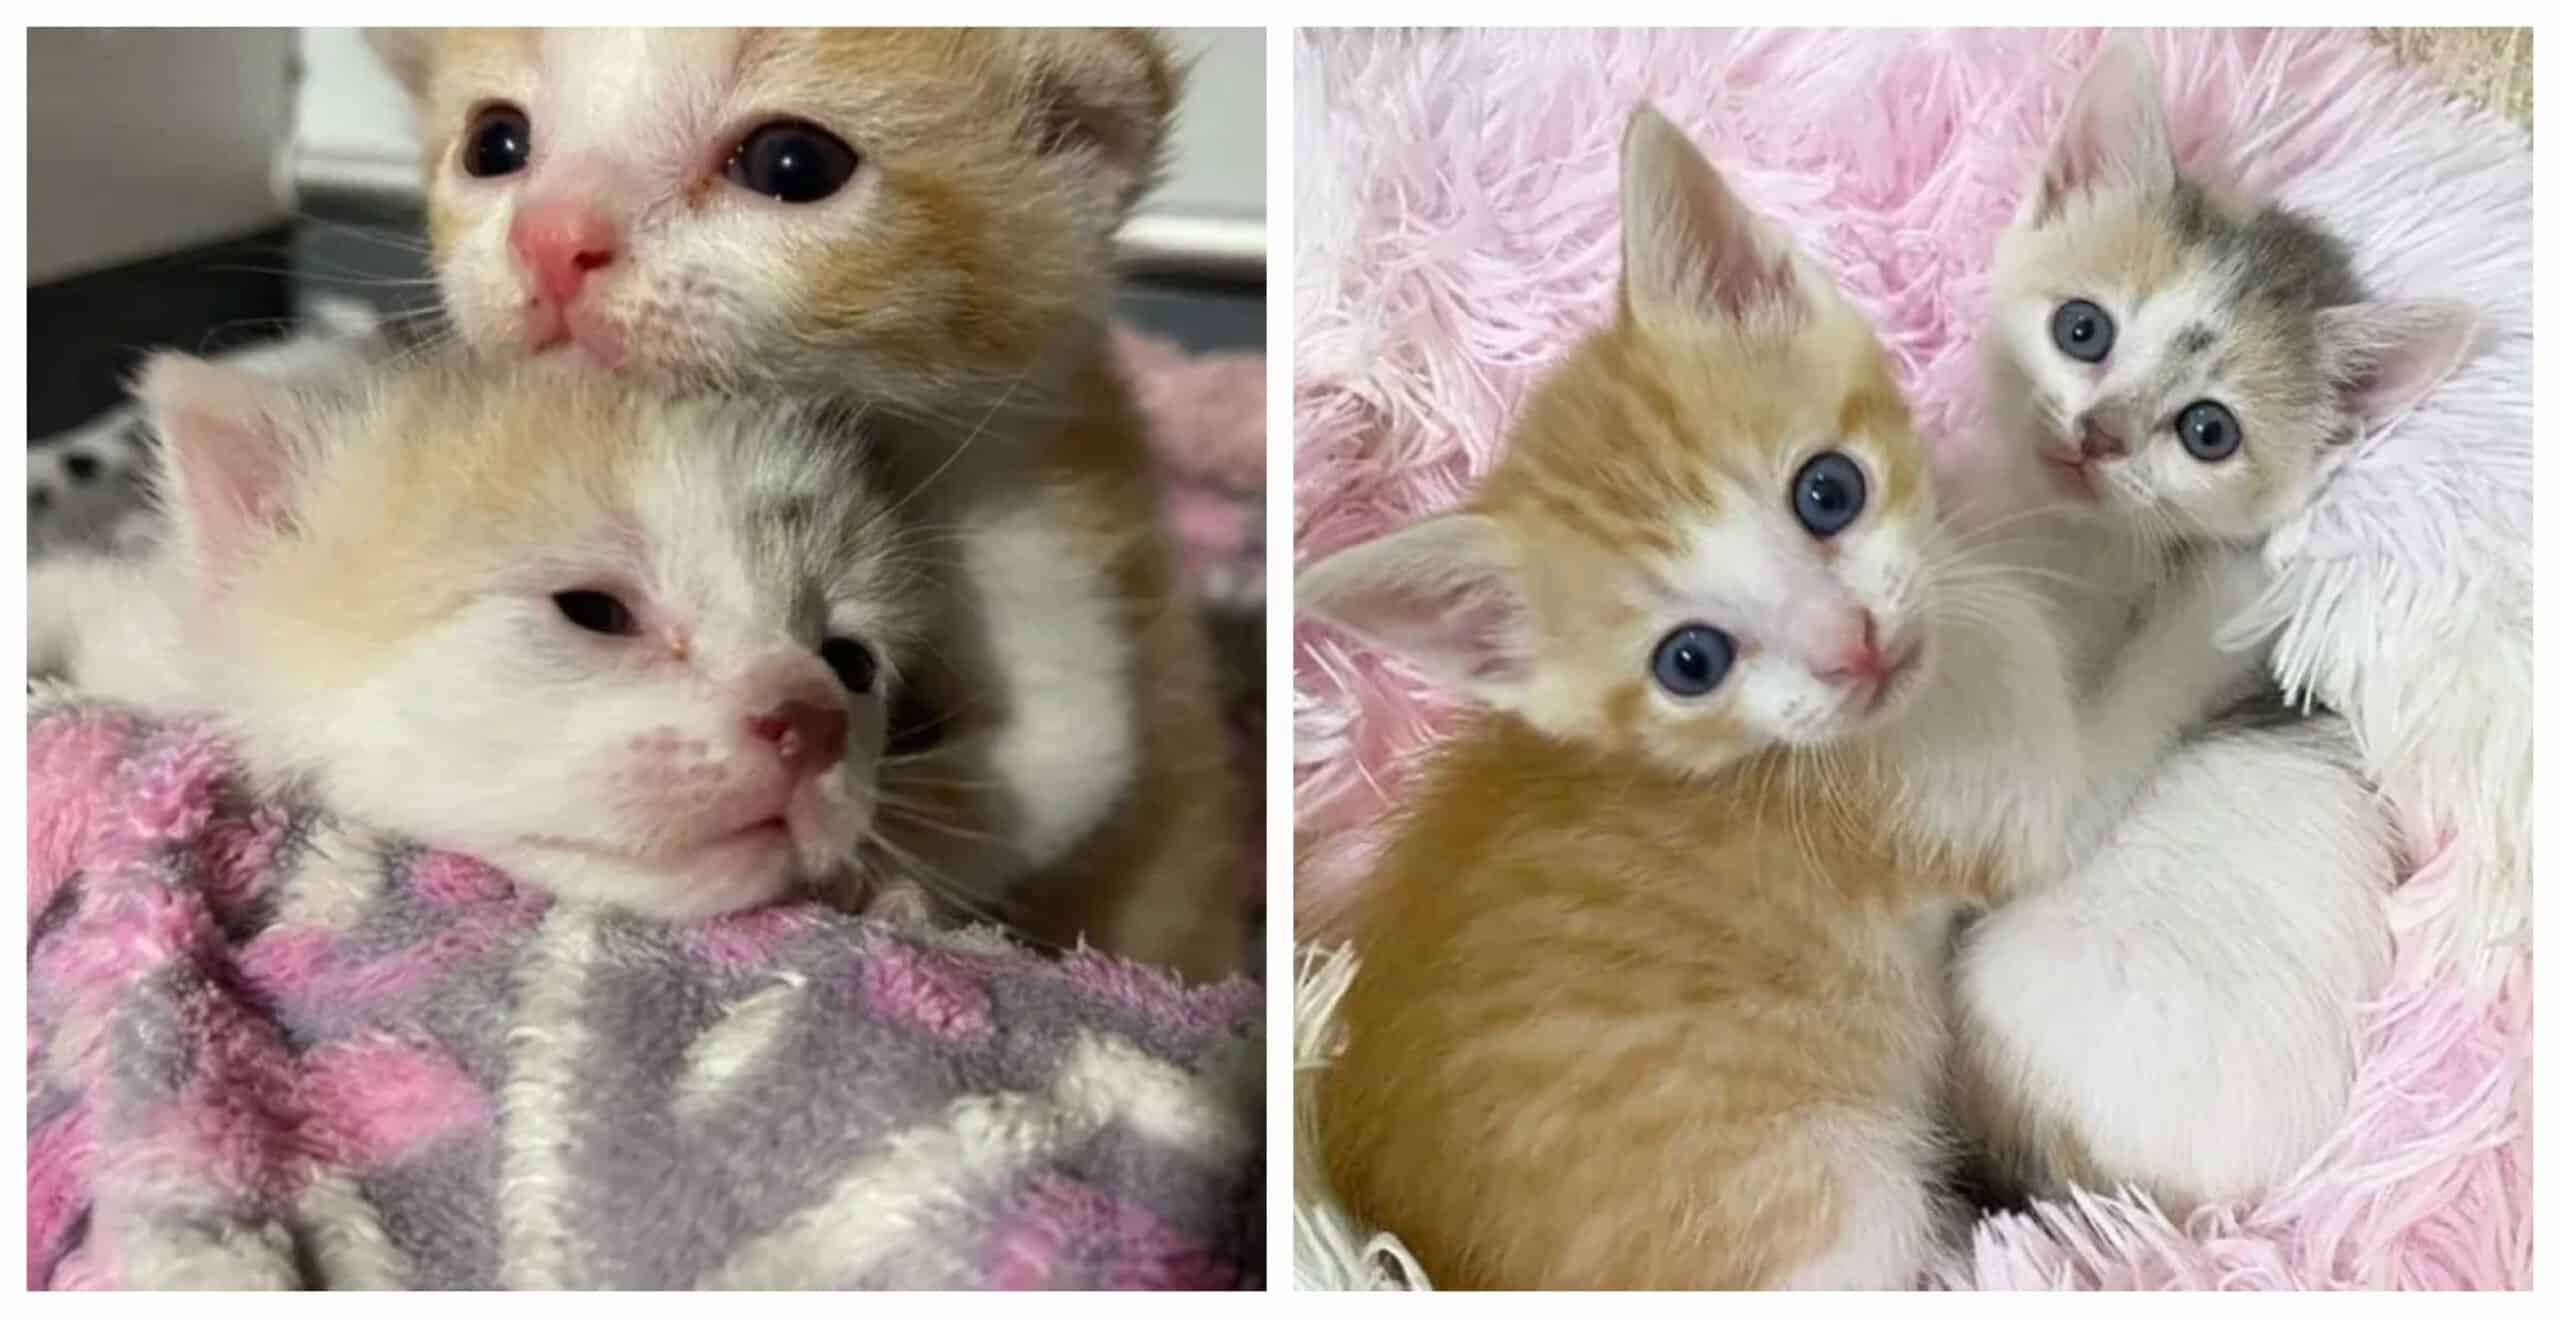 A Kind Couple Changes the Lives of Kittens Left in a Parking Lot